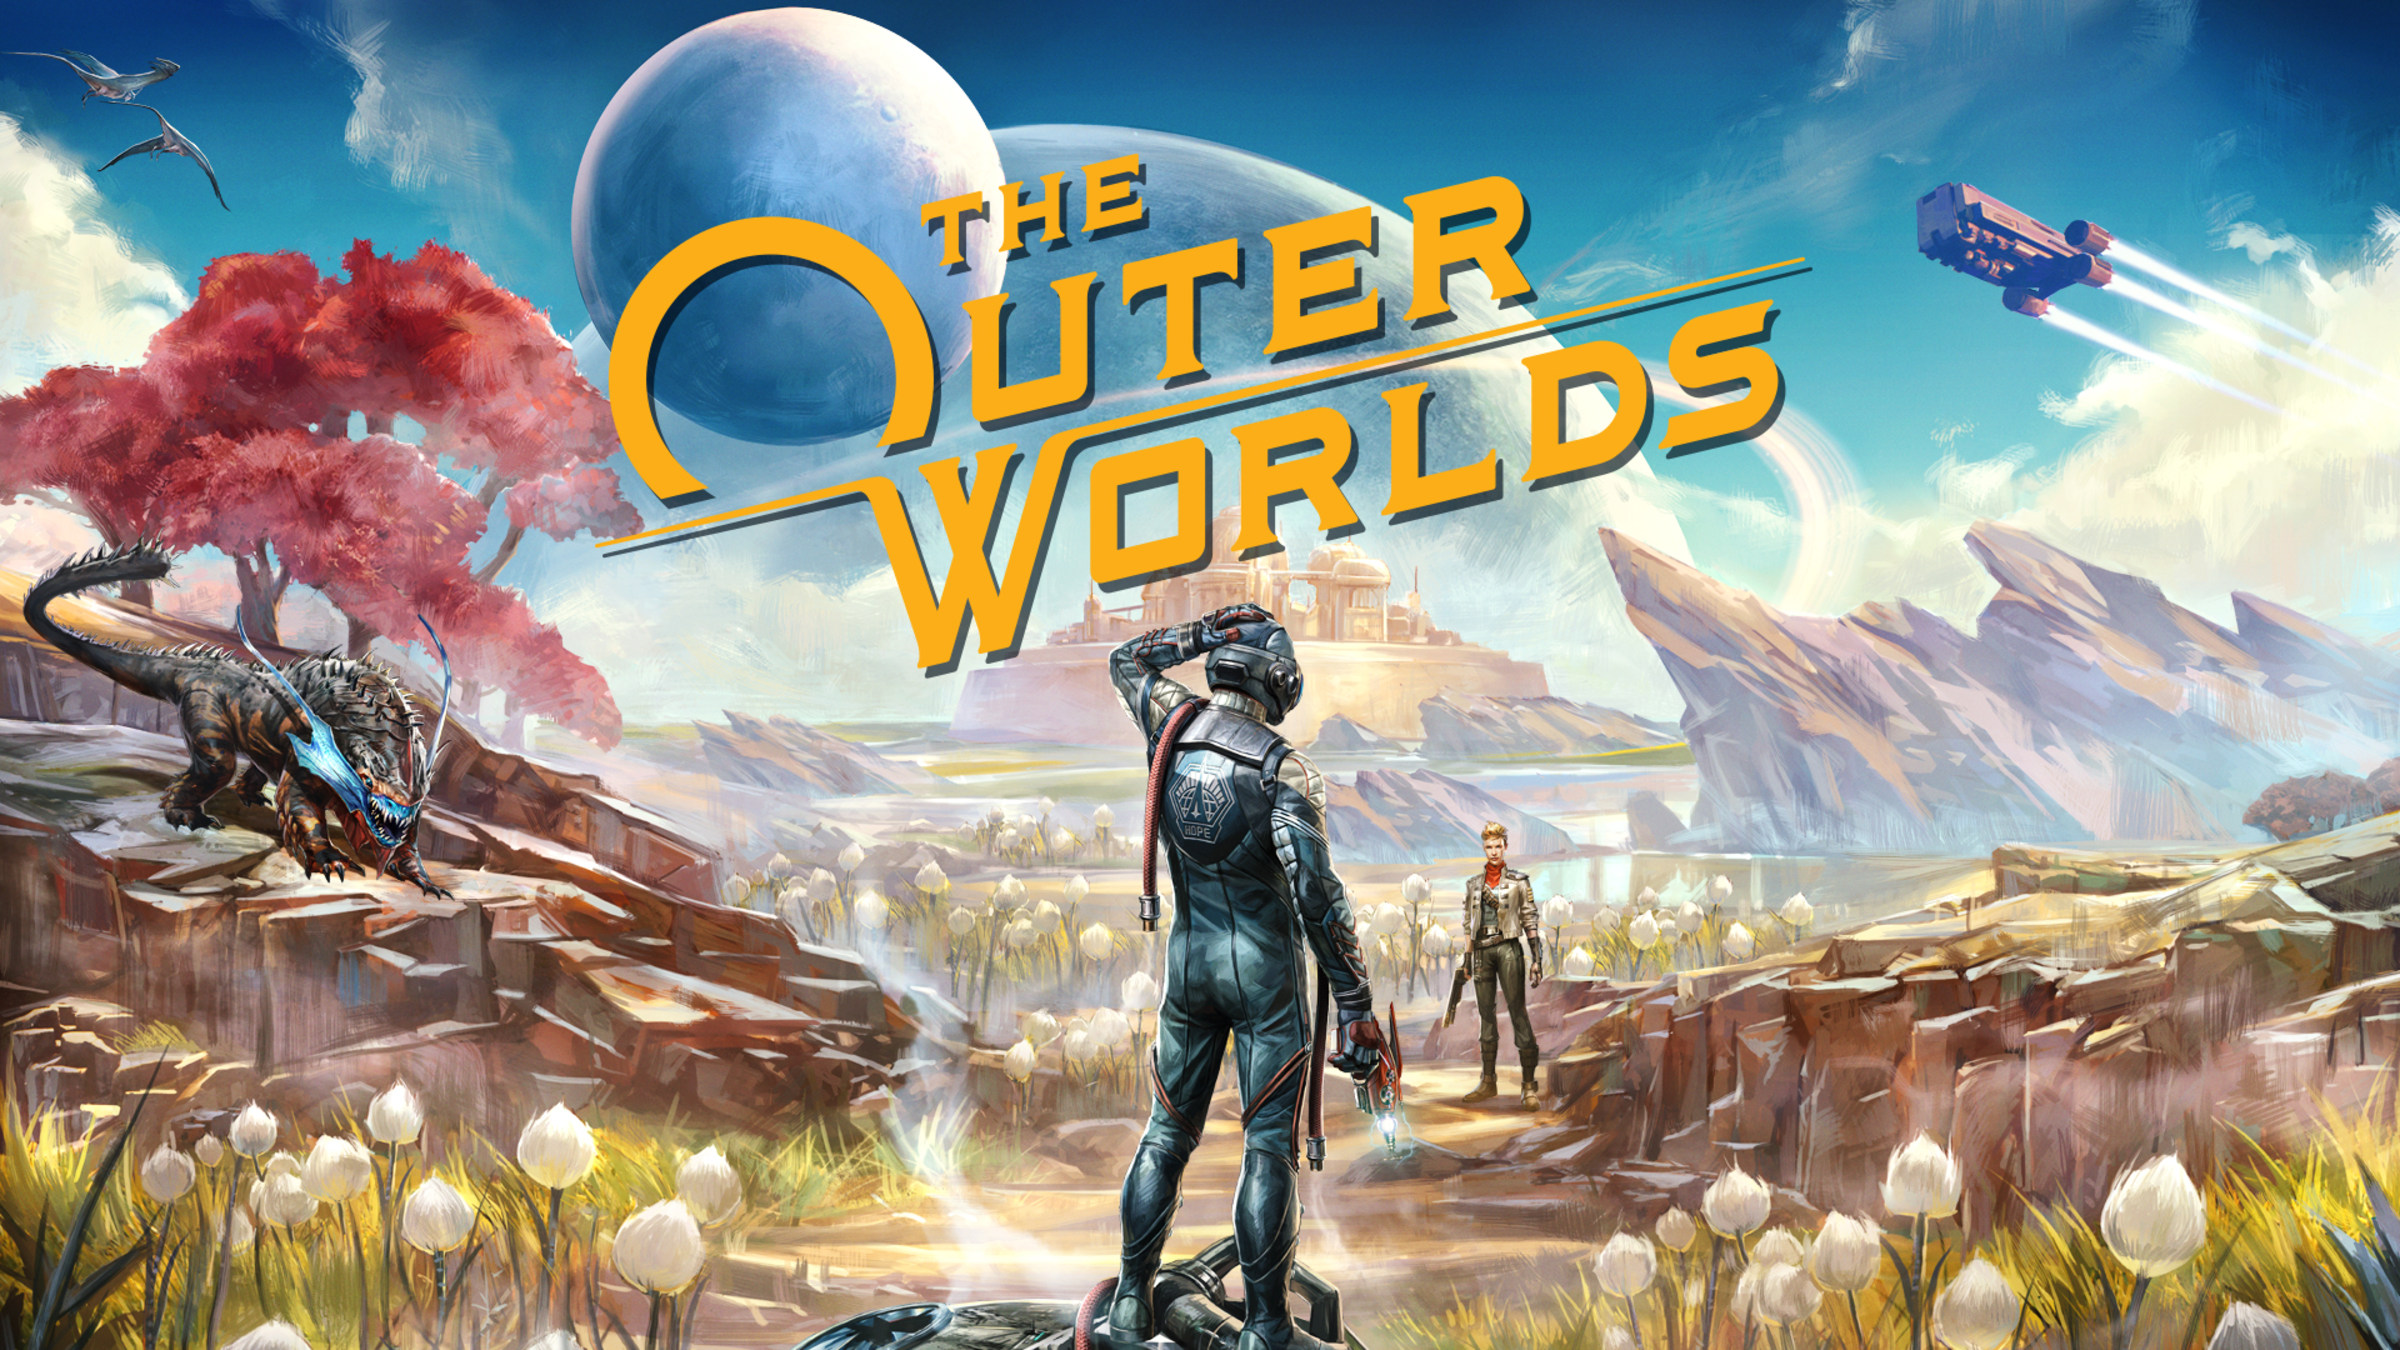 The Outer Worlds, Nintendo Switch games, Games